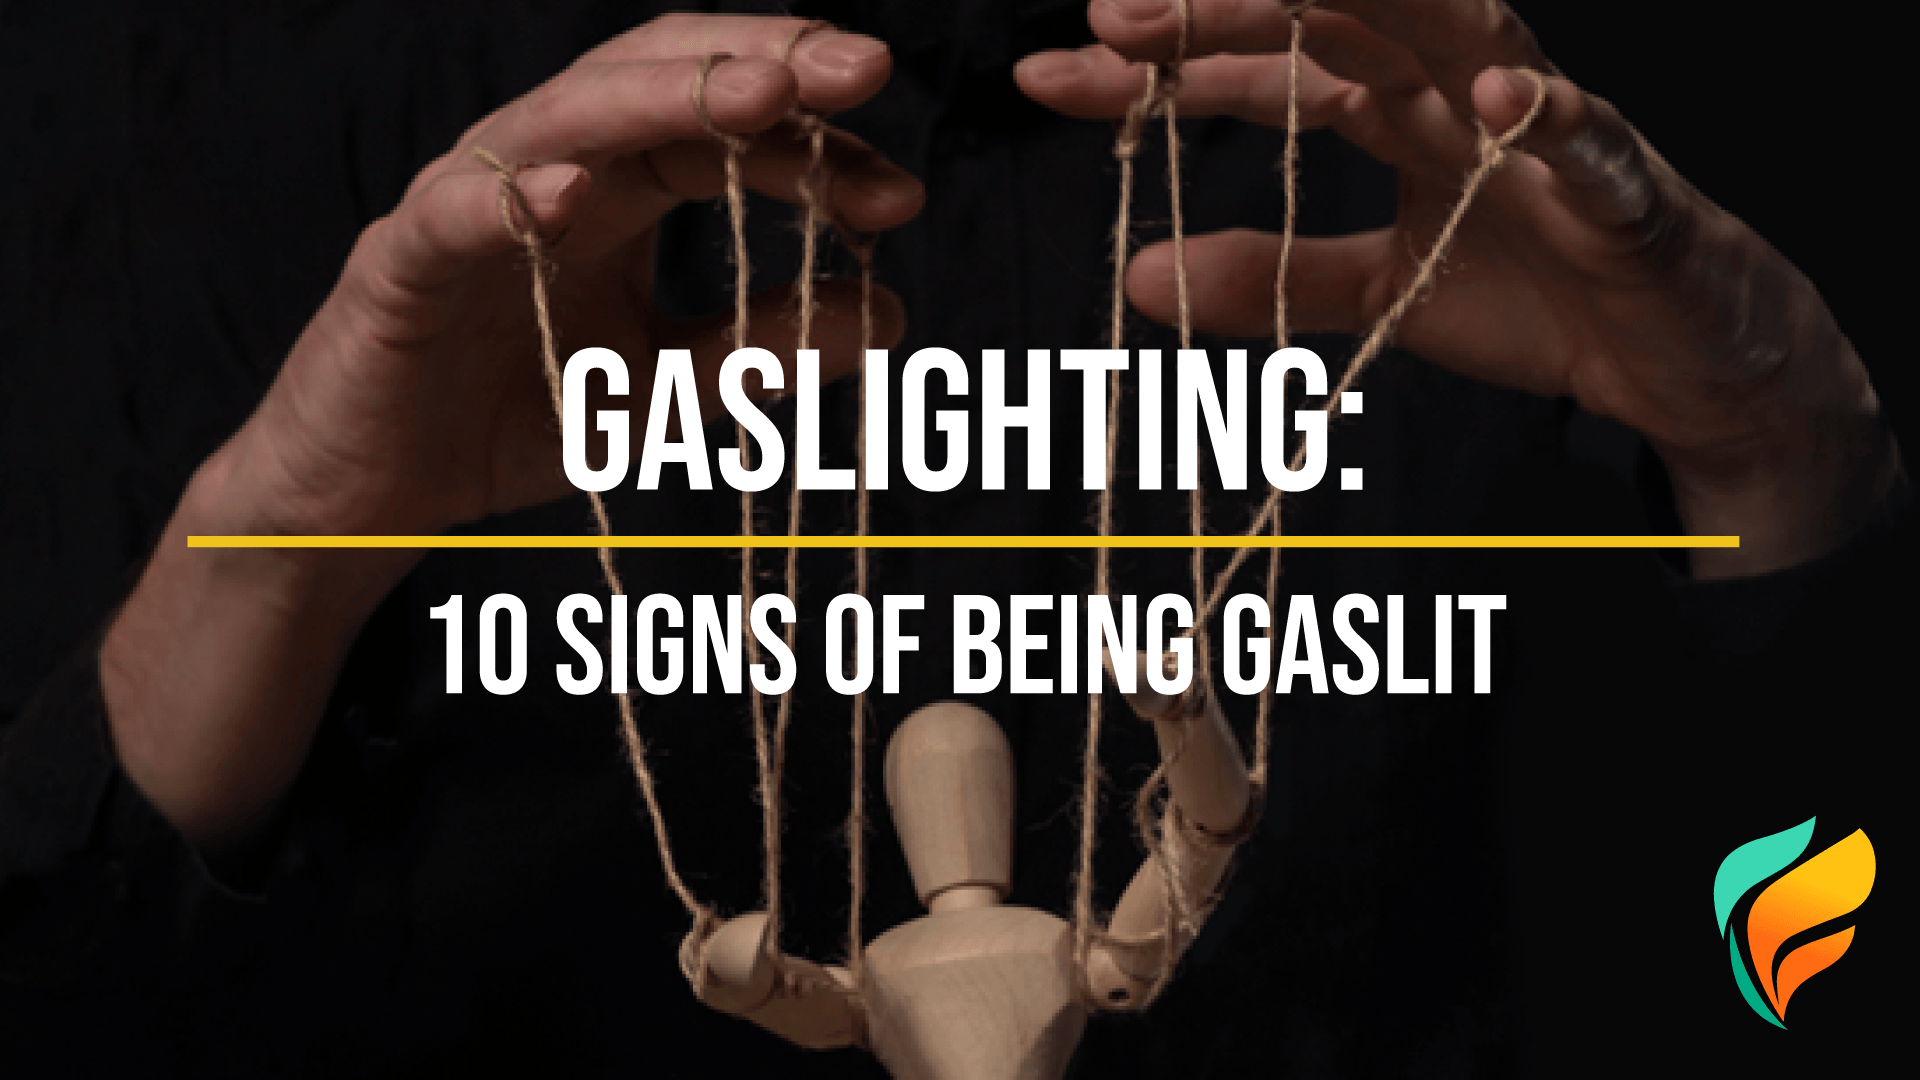 Gaslighting: 10 Signs of Gaslighting To Recognize & Defend Against